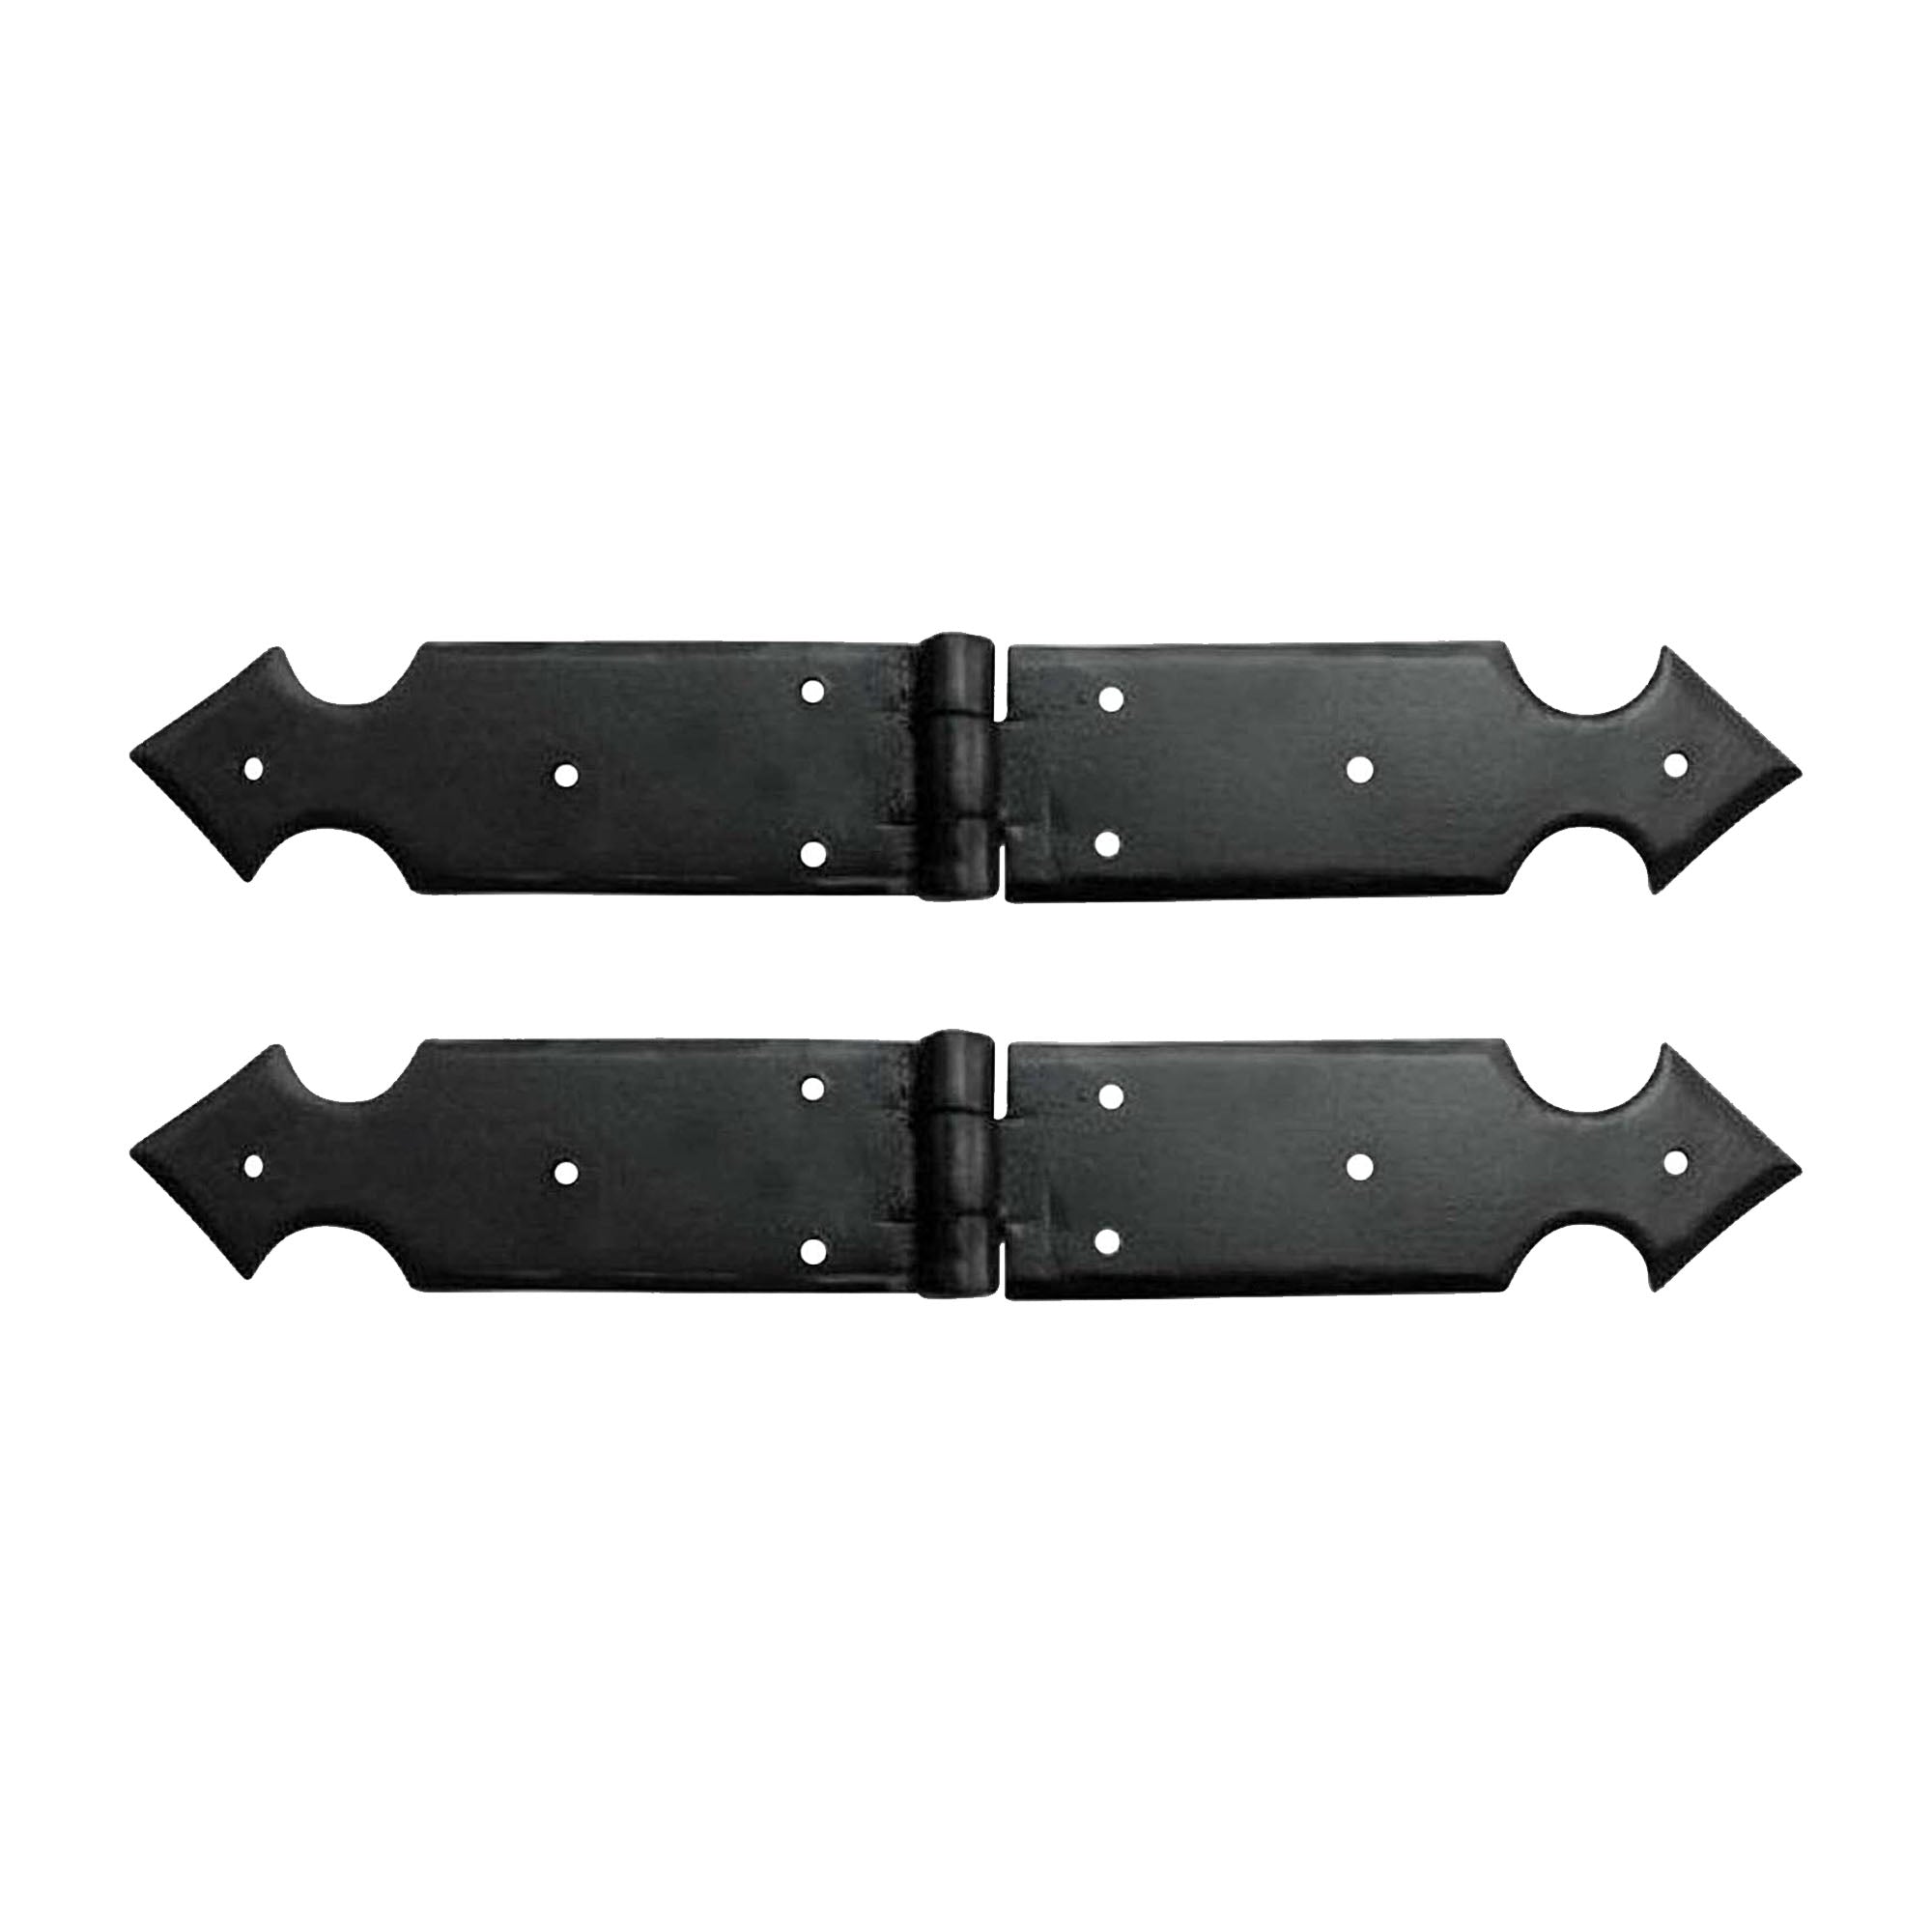 Black Antique Iron Hand Forged Double Strap Hinge Set - 2 Piece Gate Hinges for Wooden and Metal Fences, Doors, Cabinets - Black Powder Coated Finish